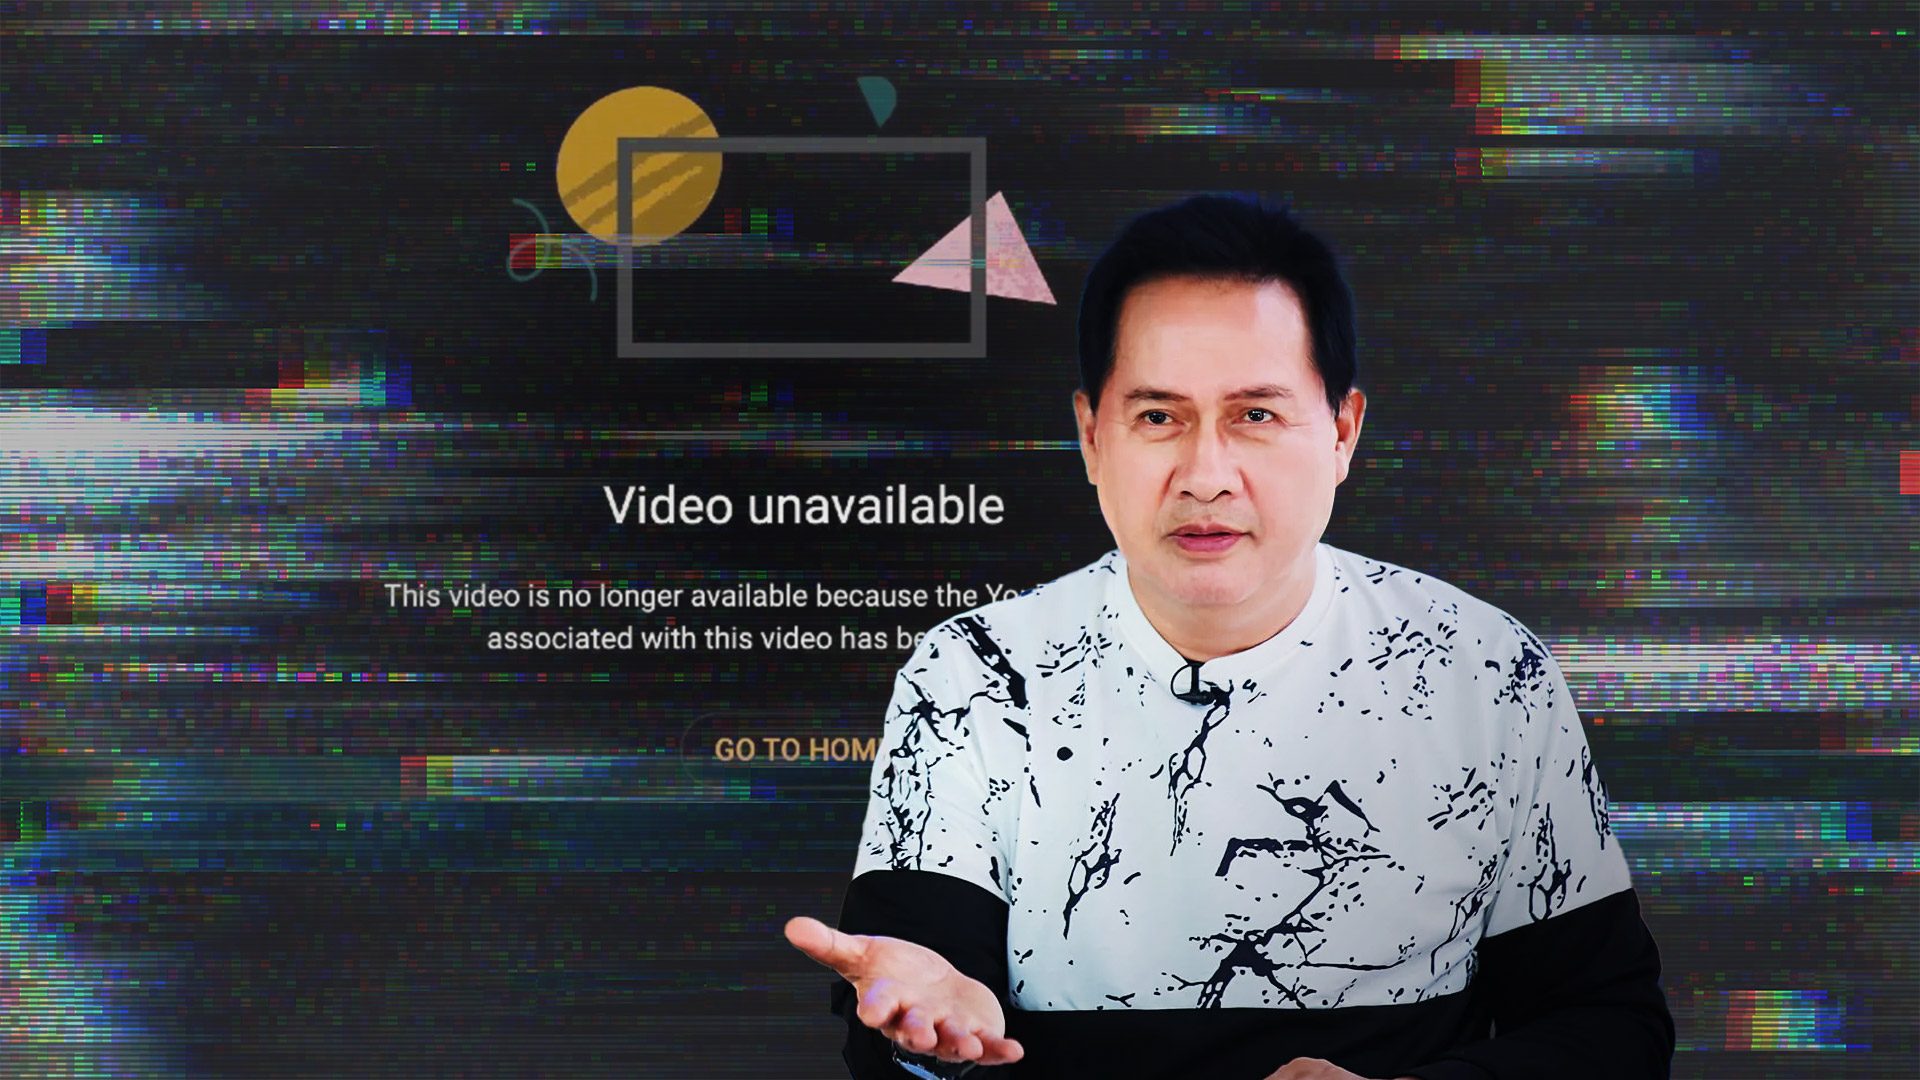 Google terminates Quiboloy channel in ‘compliance with applicable US sanctions laws’